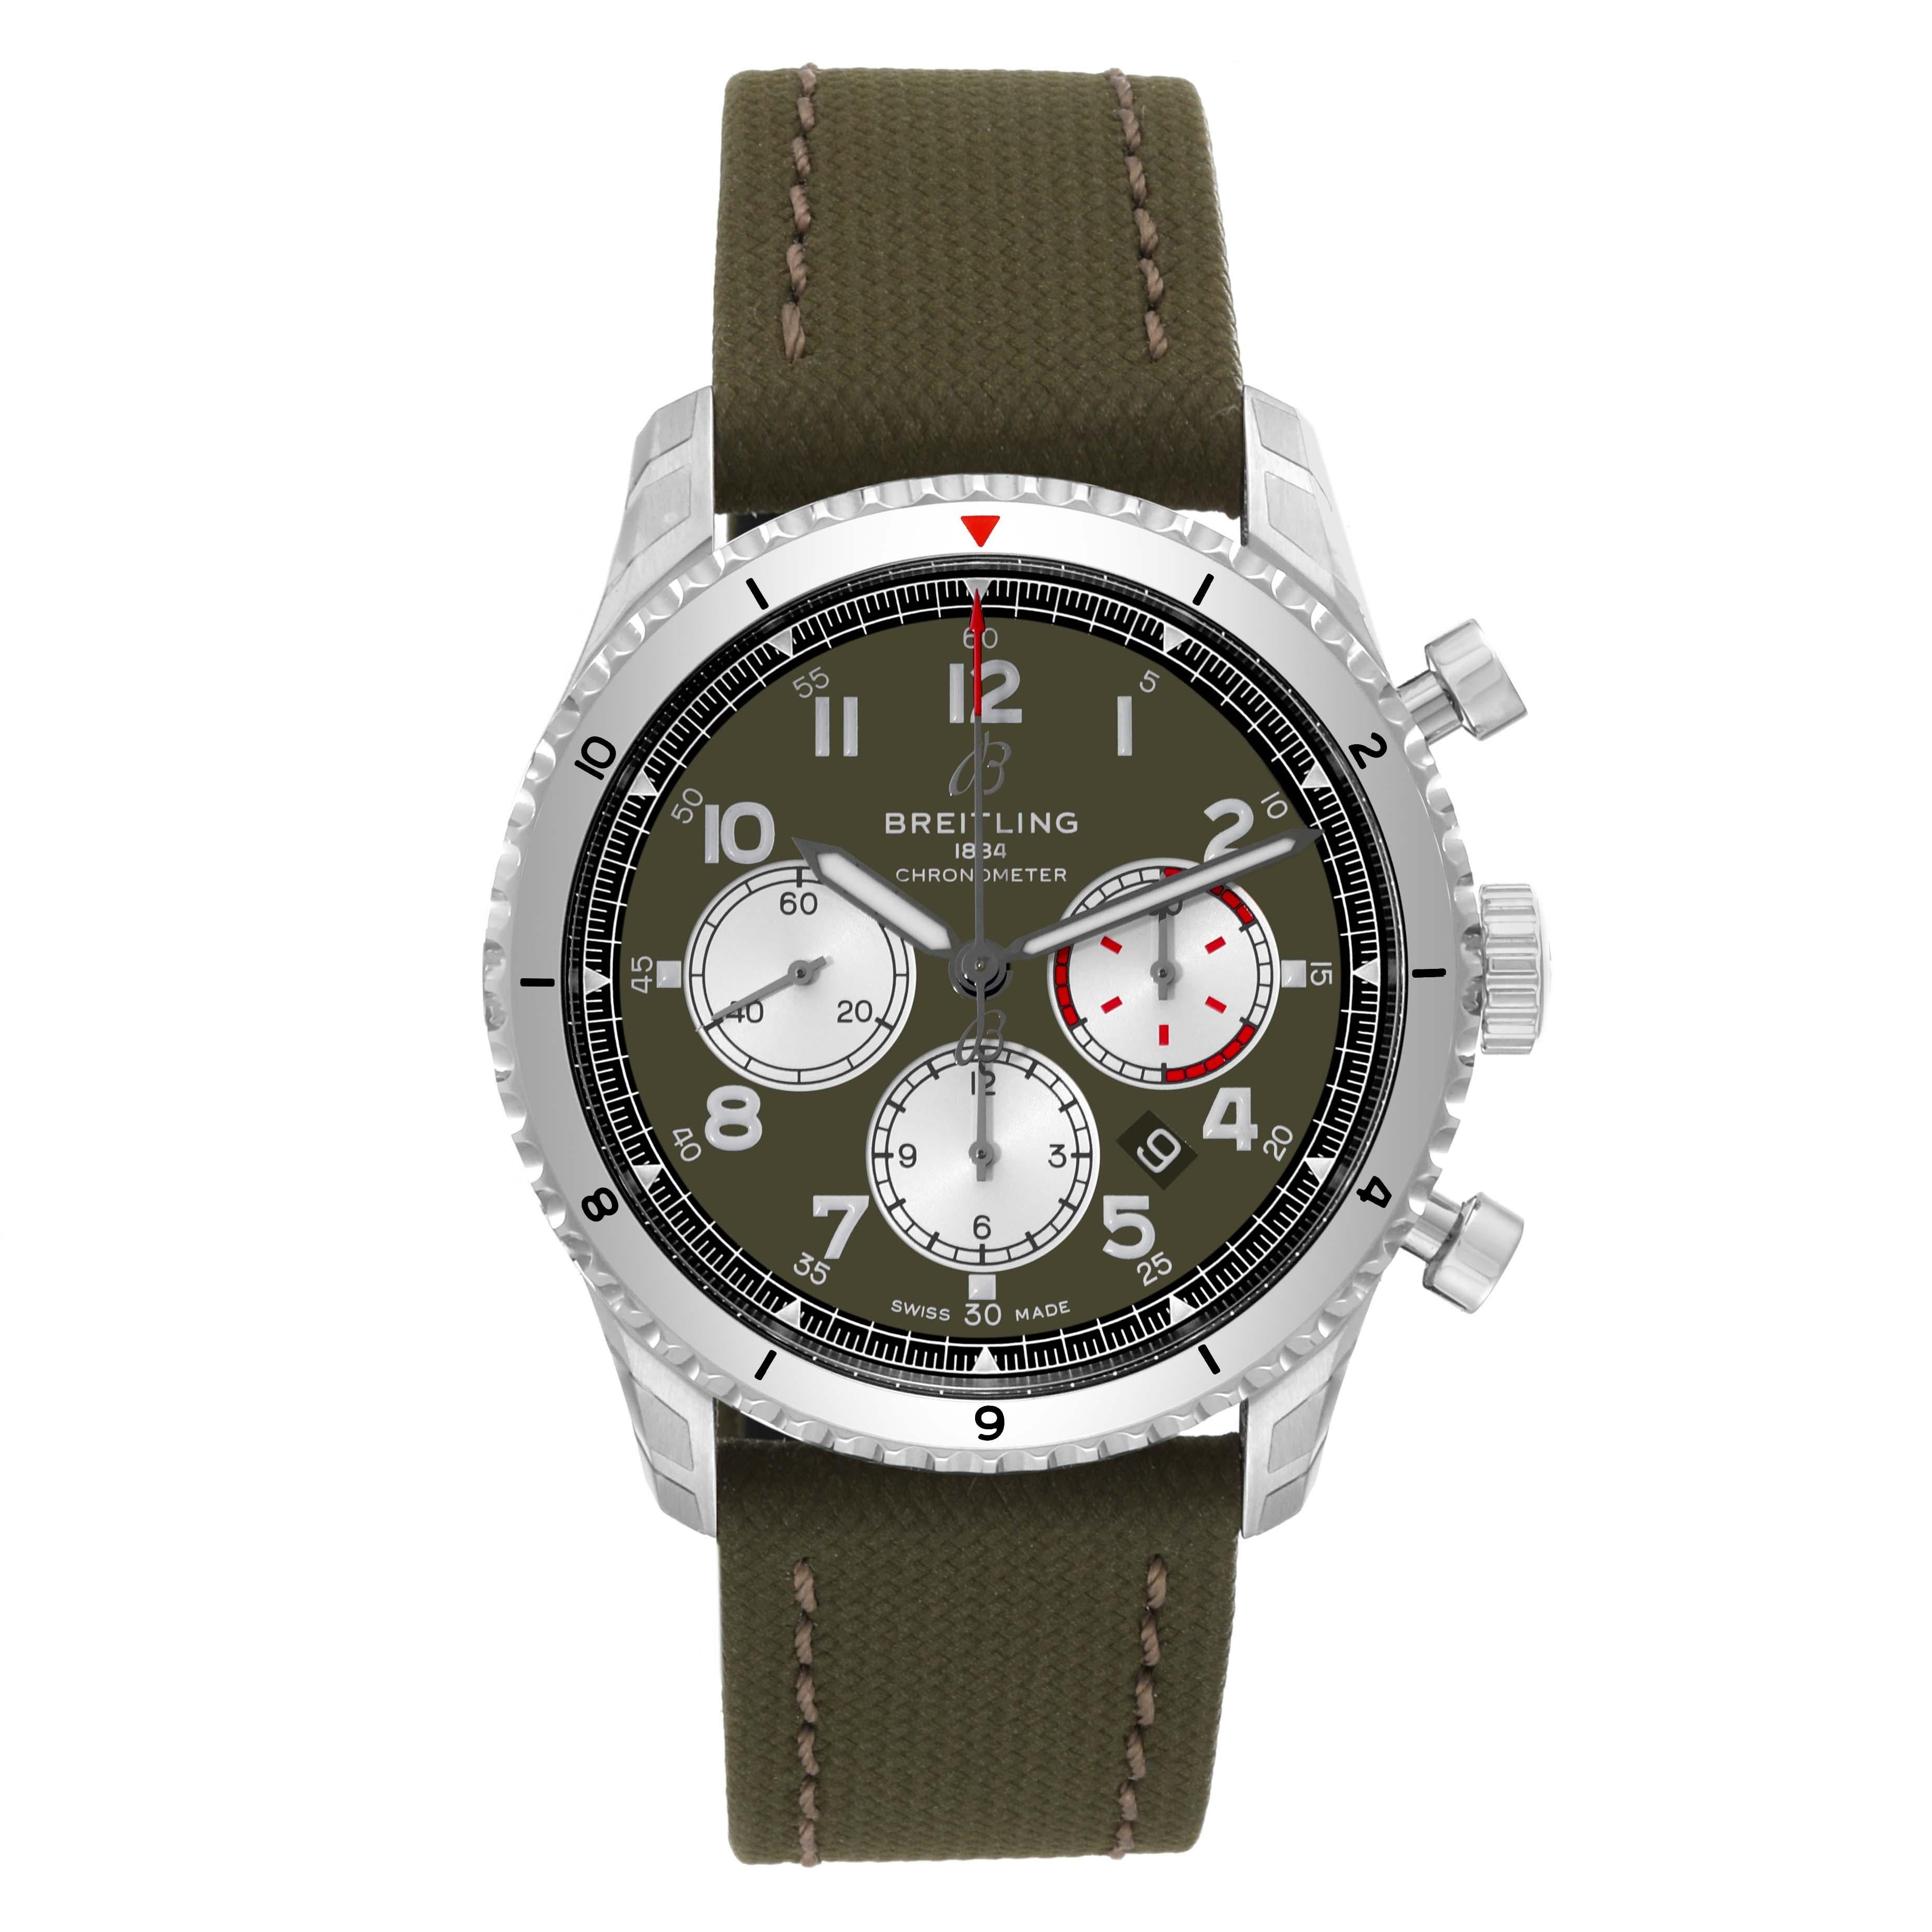 Breitling Aviator 8 B01 Curtiss Warhawk Steel Mens Watch AB0119 Unworn. Self-winding automatic officially certified chronometer movement. Chronograph function. Stainless steel case 43.0 mm in diameter. Exhibition transparent sapphire crystal